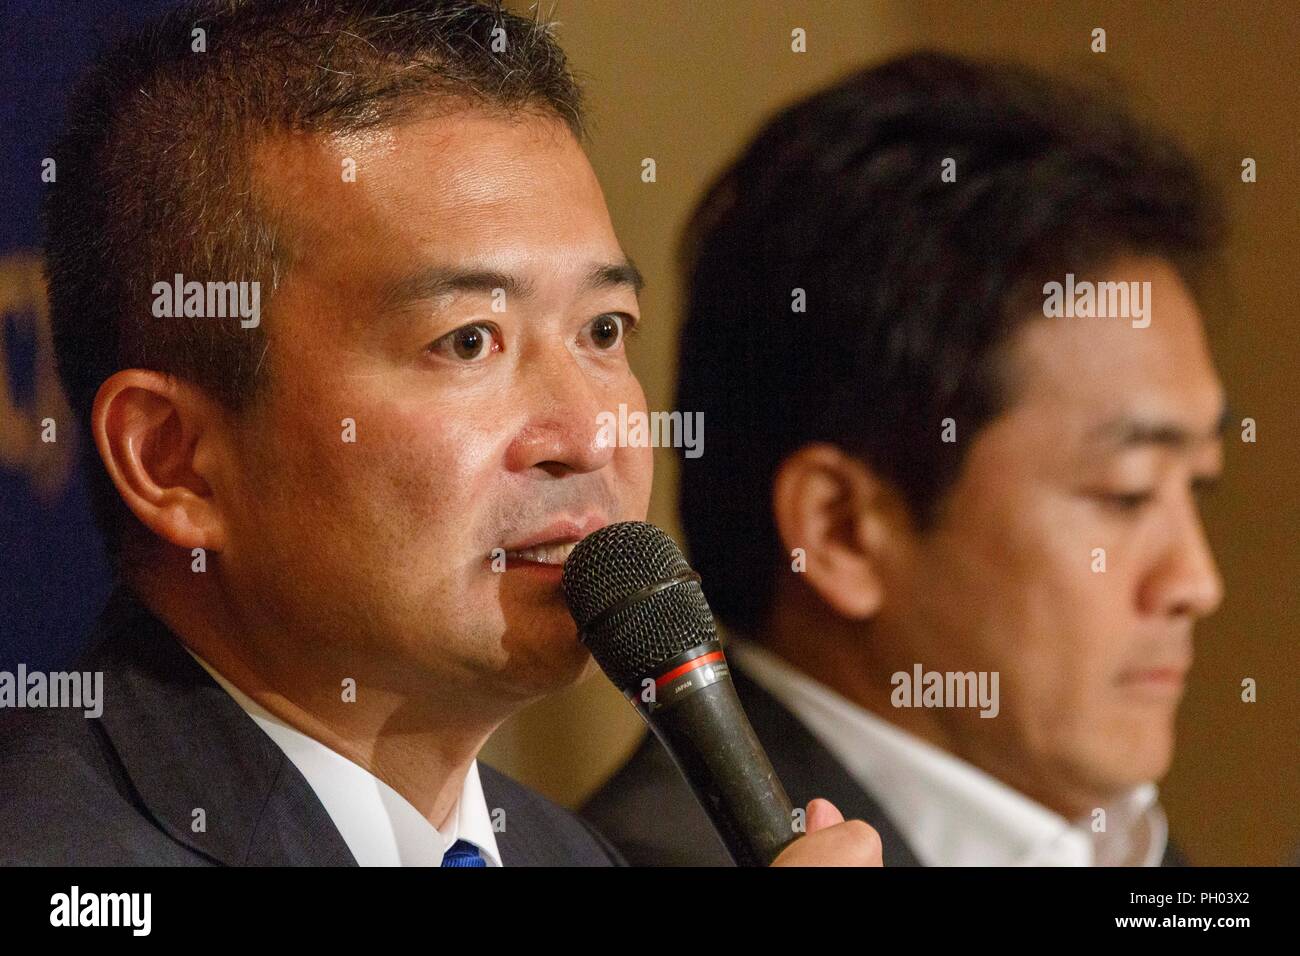 Tokyo, Japan. 29th Aug 2018. (L to R) Japanese politicians Keisuke Tsumura and Yuichiro Tamaki, both candidates for their party's leadership, speak during a news conference at the Foreign Correspondents' Club of Japan on August 29, 2018, Tokyo, Japan. Tamaki and Tsumura answered questions about the coming leadership election for the Democratic Party For the People, which is set for September 4. Credit: Rodrigo Reyes Marin/AFLO/Alamy Live News Stock Photo